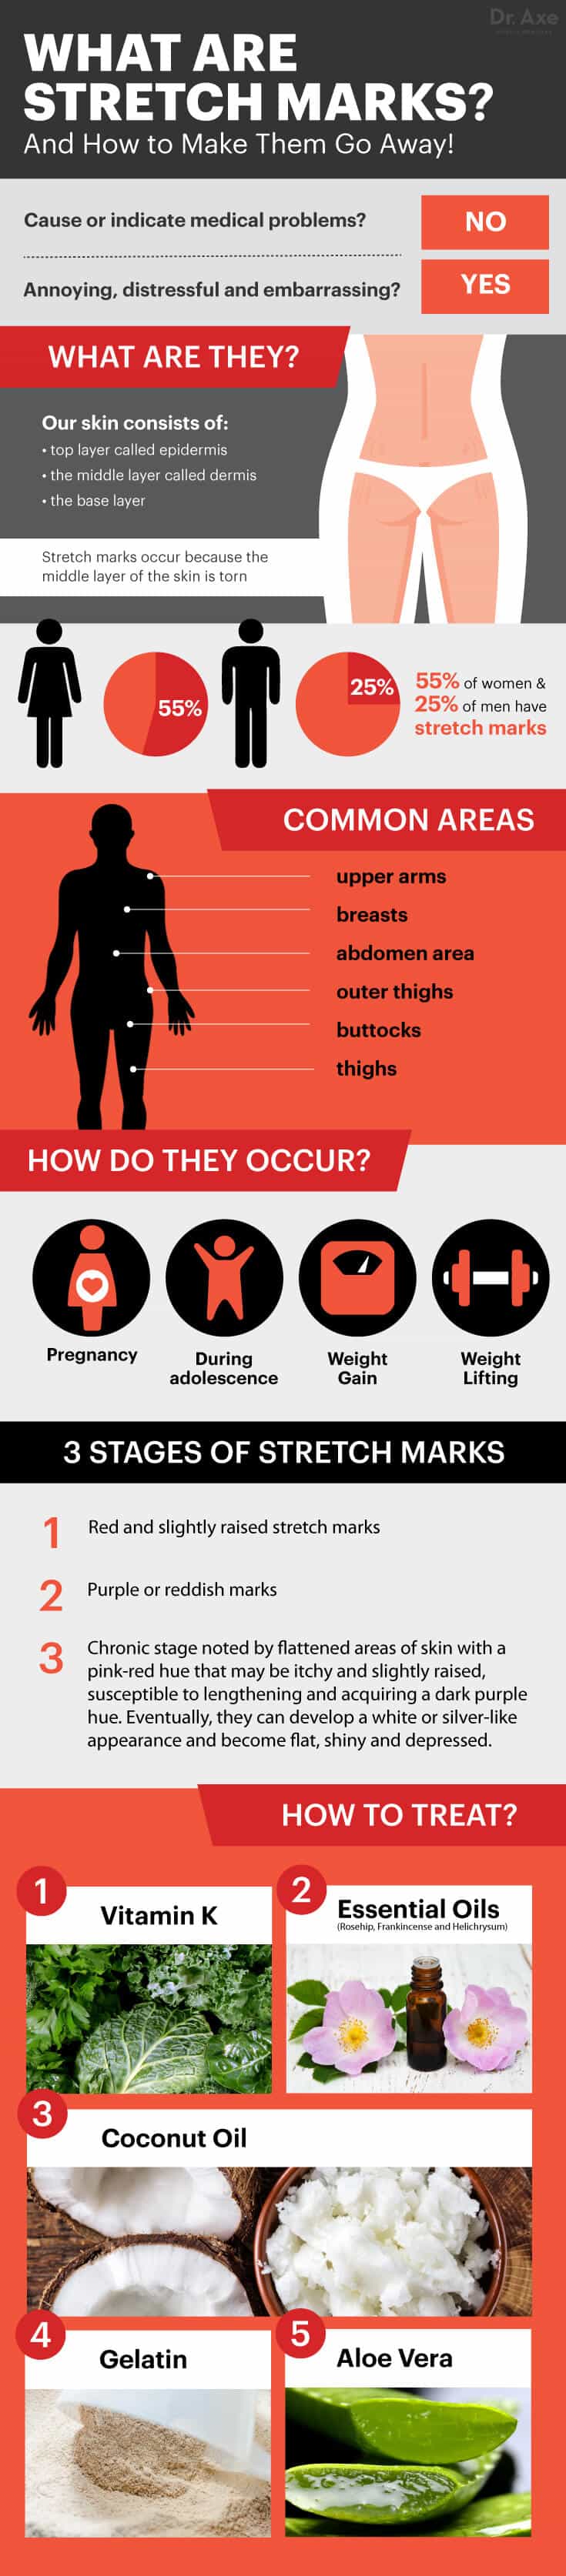 What are stretch marks? - Dr. Axe